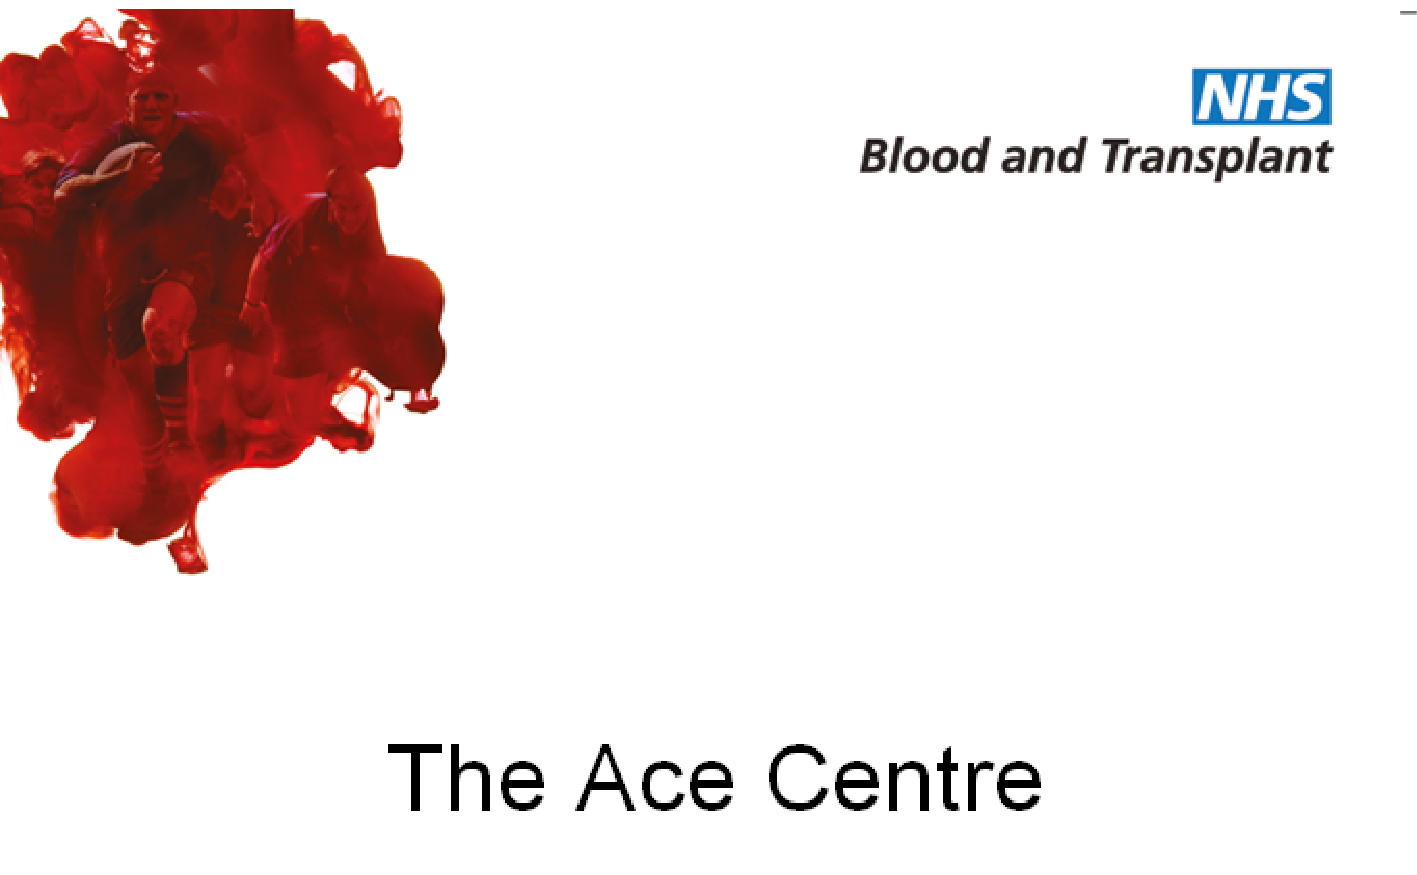 Give blood at The ACE Centre